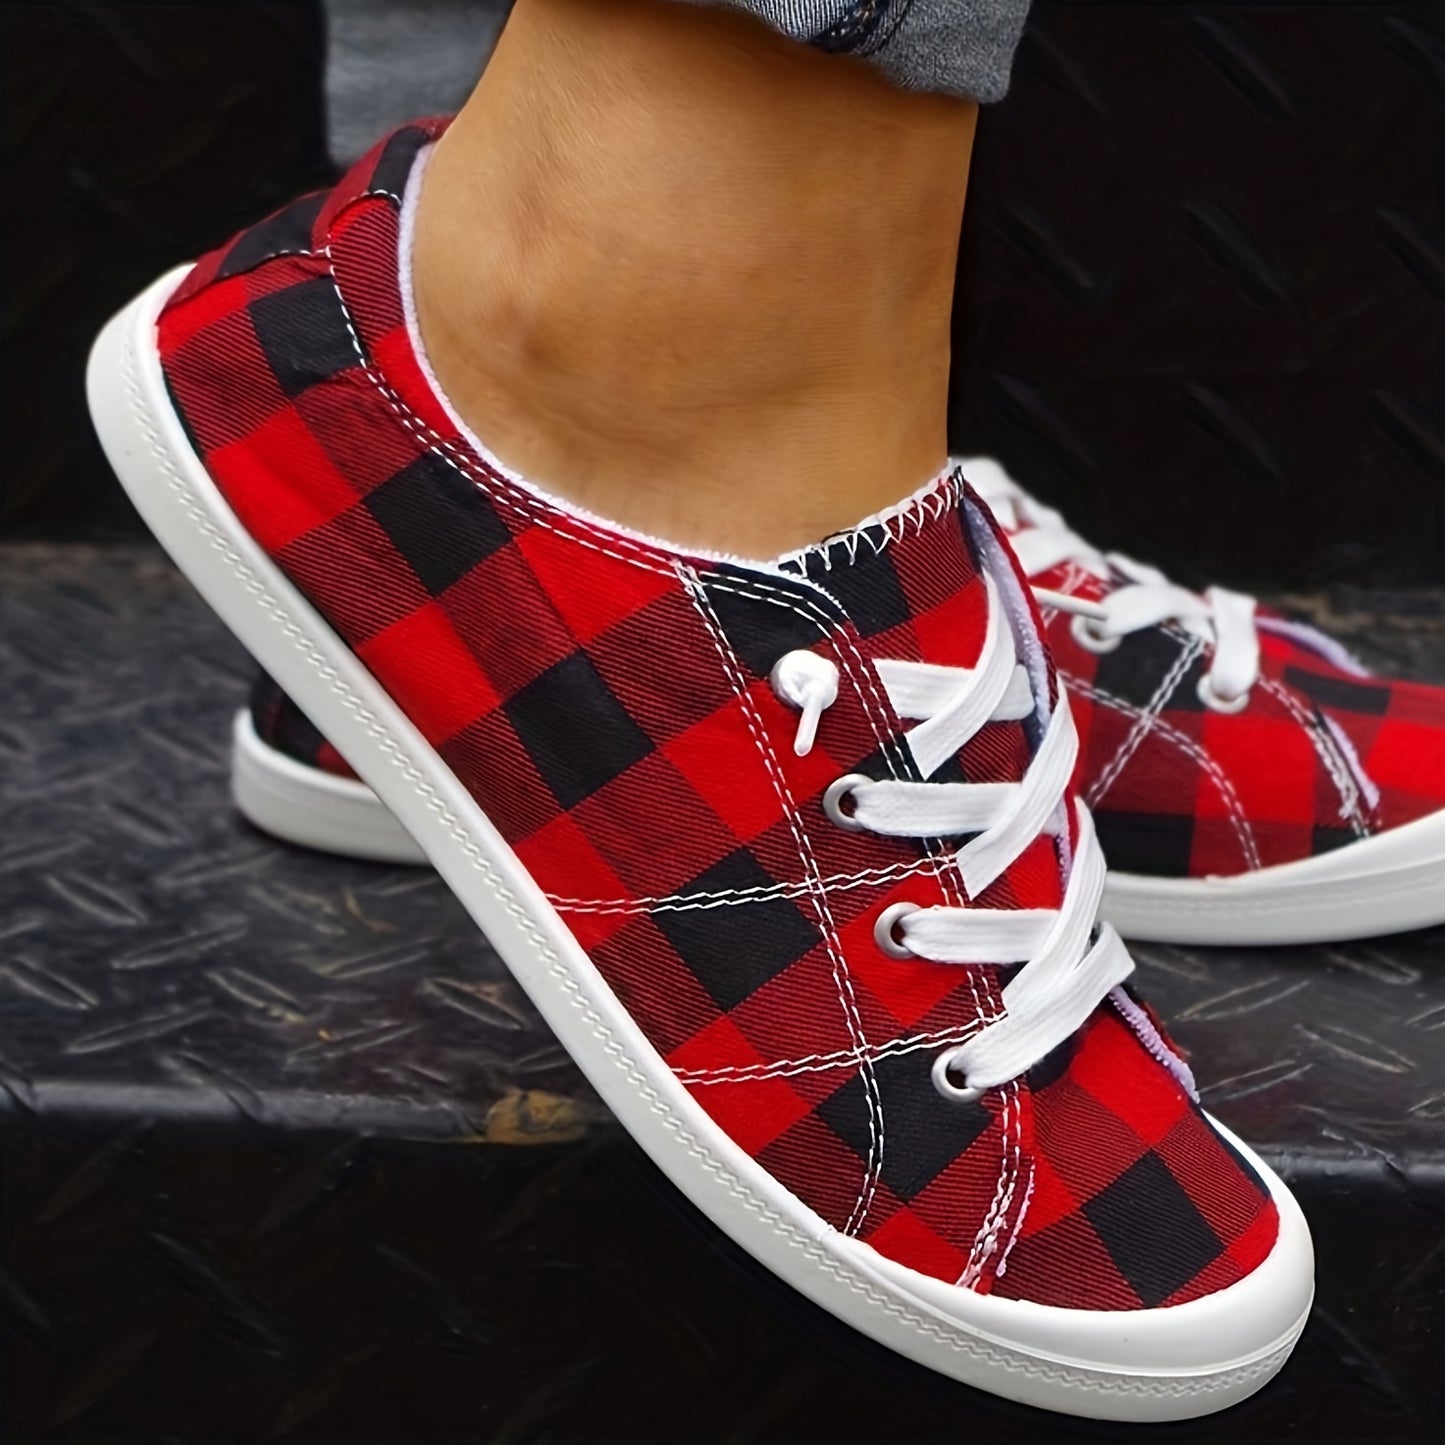 Women's Plaid Pattern Canvas Shoes, Casual Lace Up Outdoor Shoes, Lightweight Low Top Sneakers